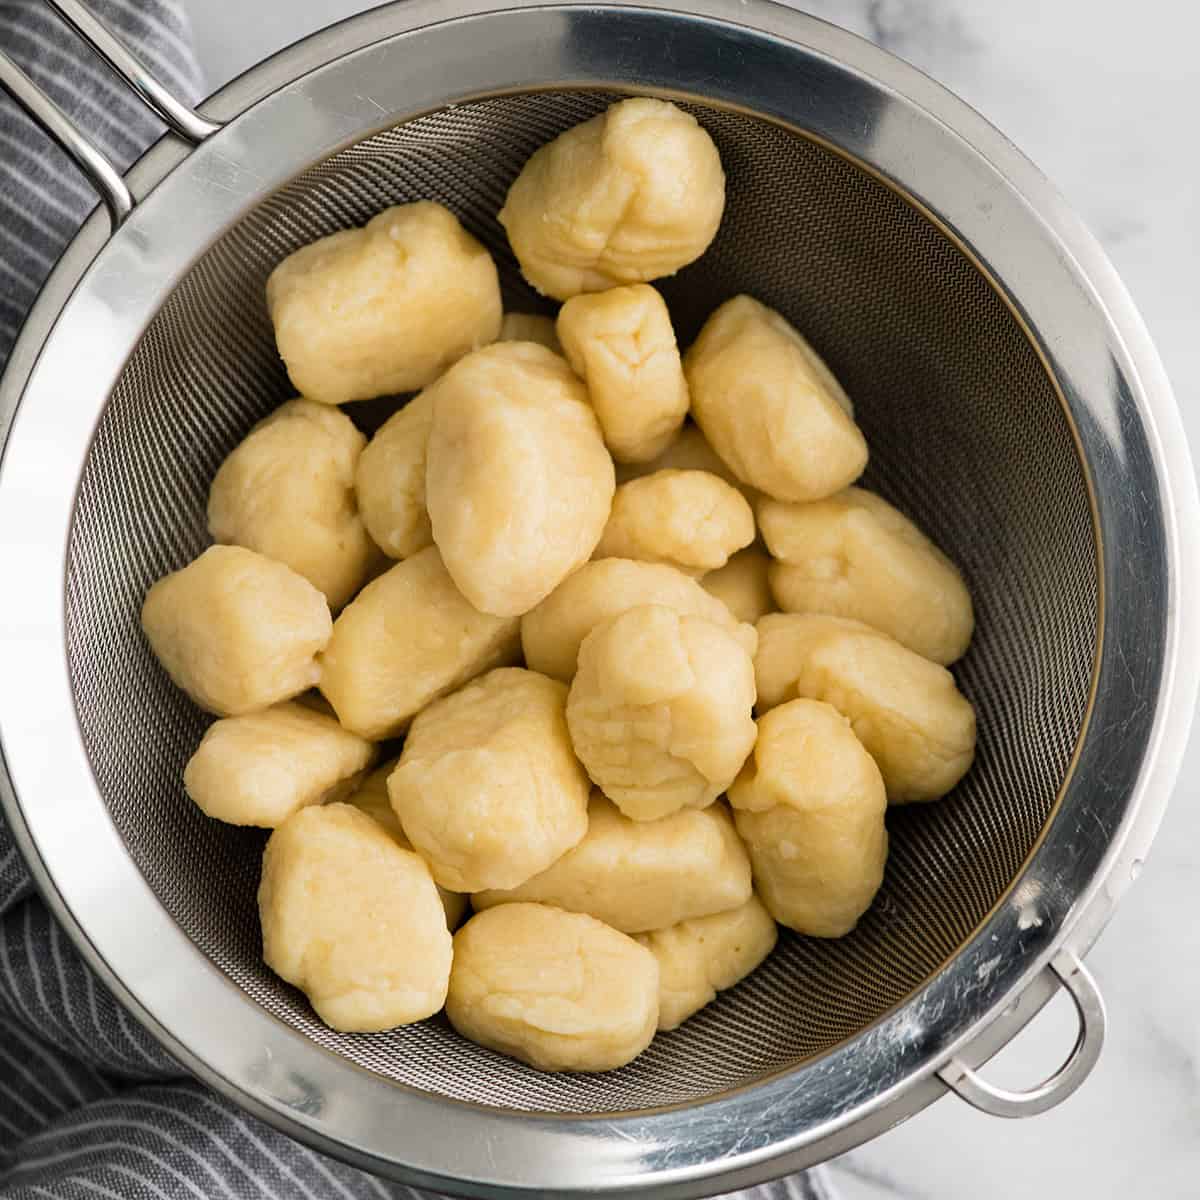 gnocchi after boiling draining in a colander